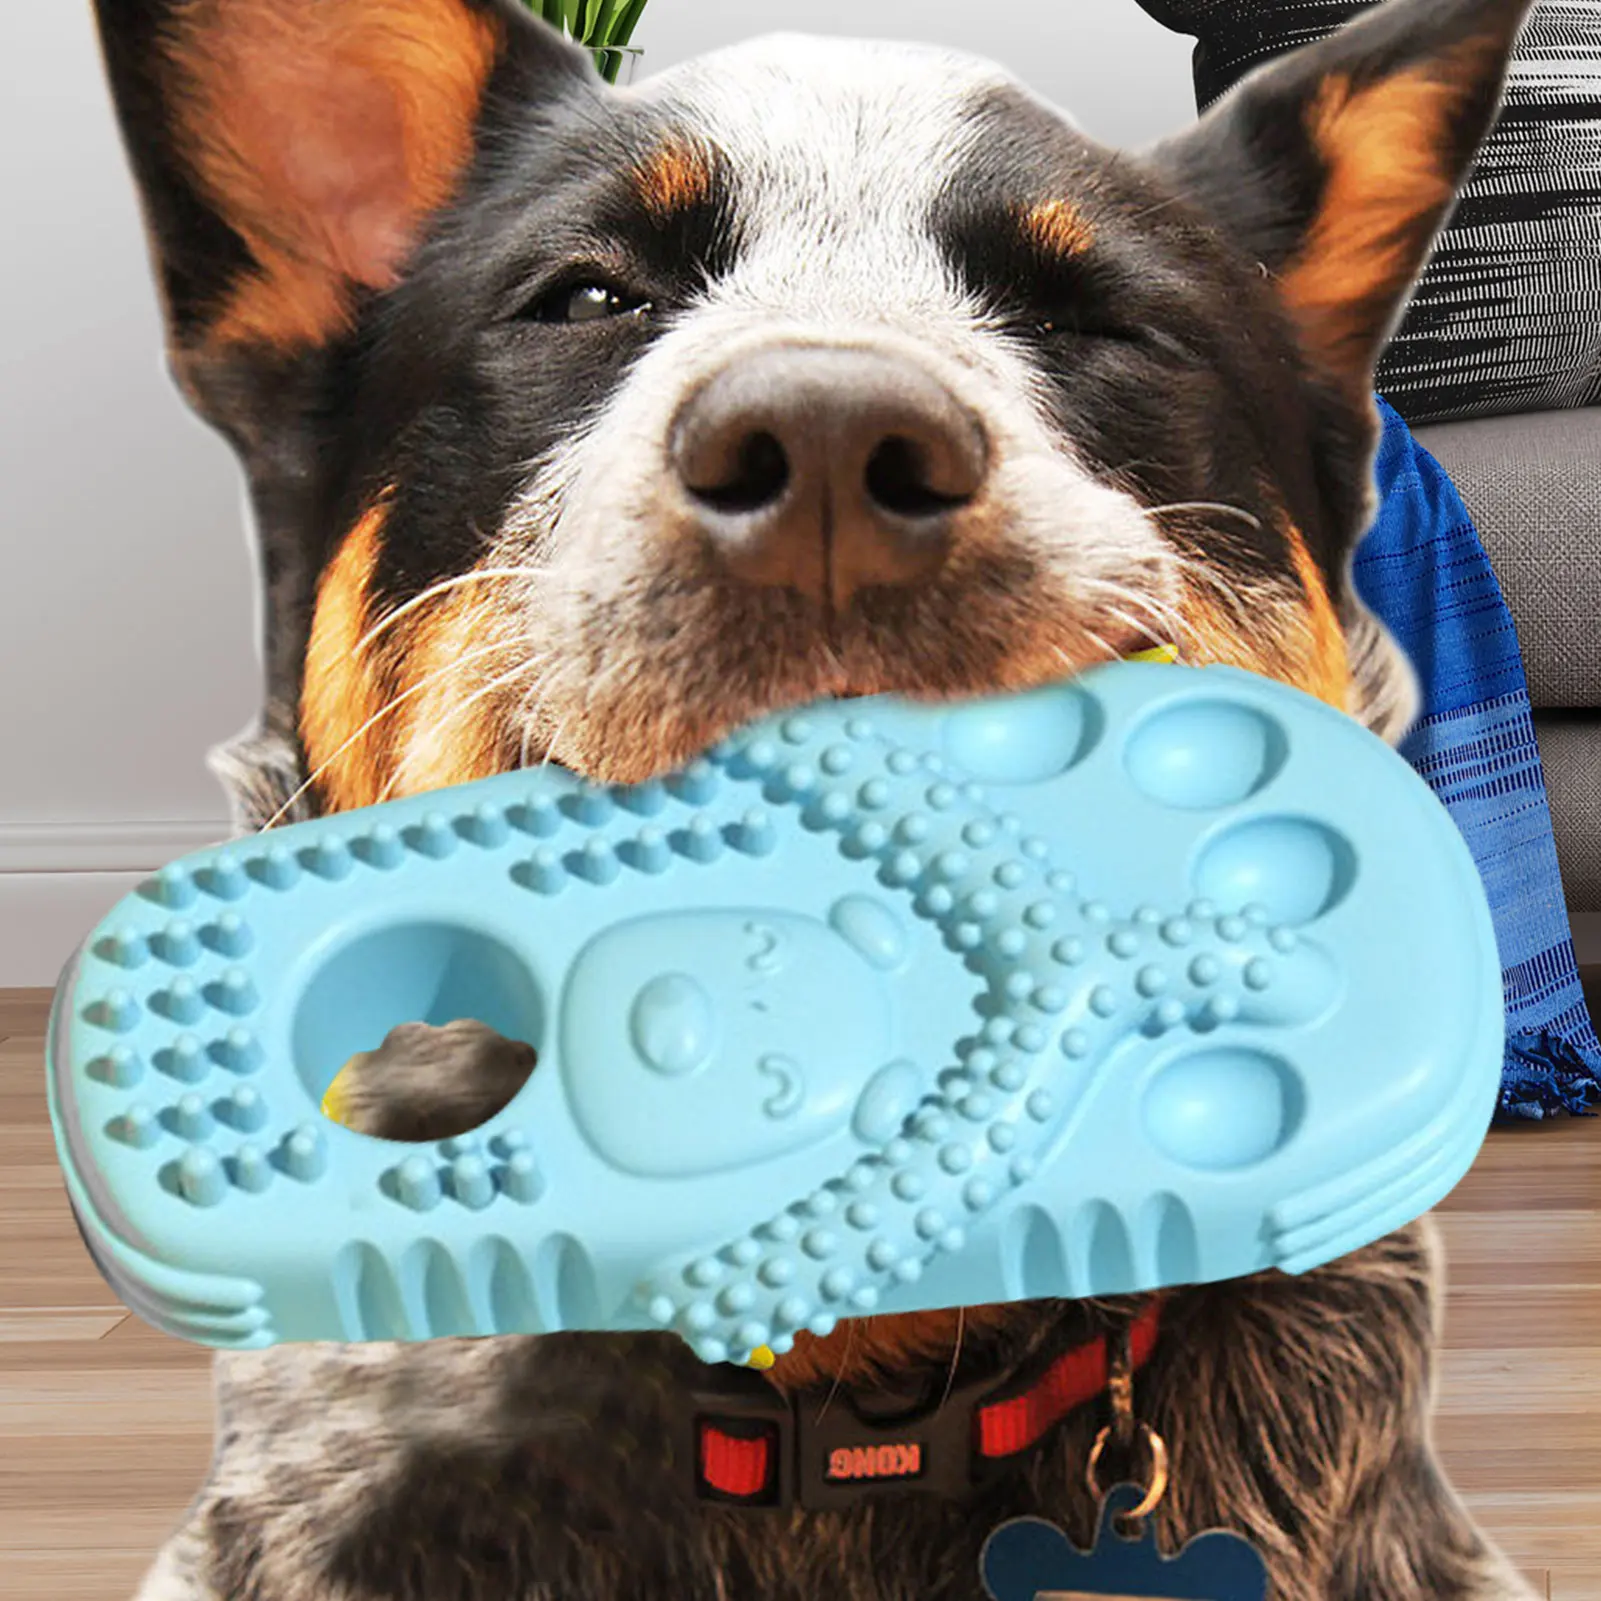 https://ae01.alicdn.com/kf/Sbd21735a5a2e48c09a4acdde75e97806f/Slipper-Shape-Dog-Chew-Toys-TPR-Dog-Teething-Toys-Interactive-Puppy-Accessories-Gifts-Novelty-Dog-Interactive.jpg